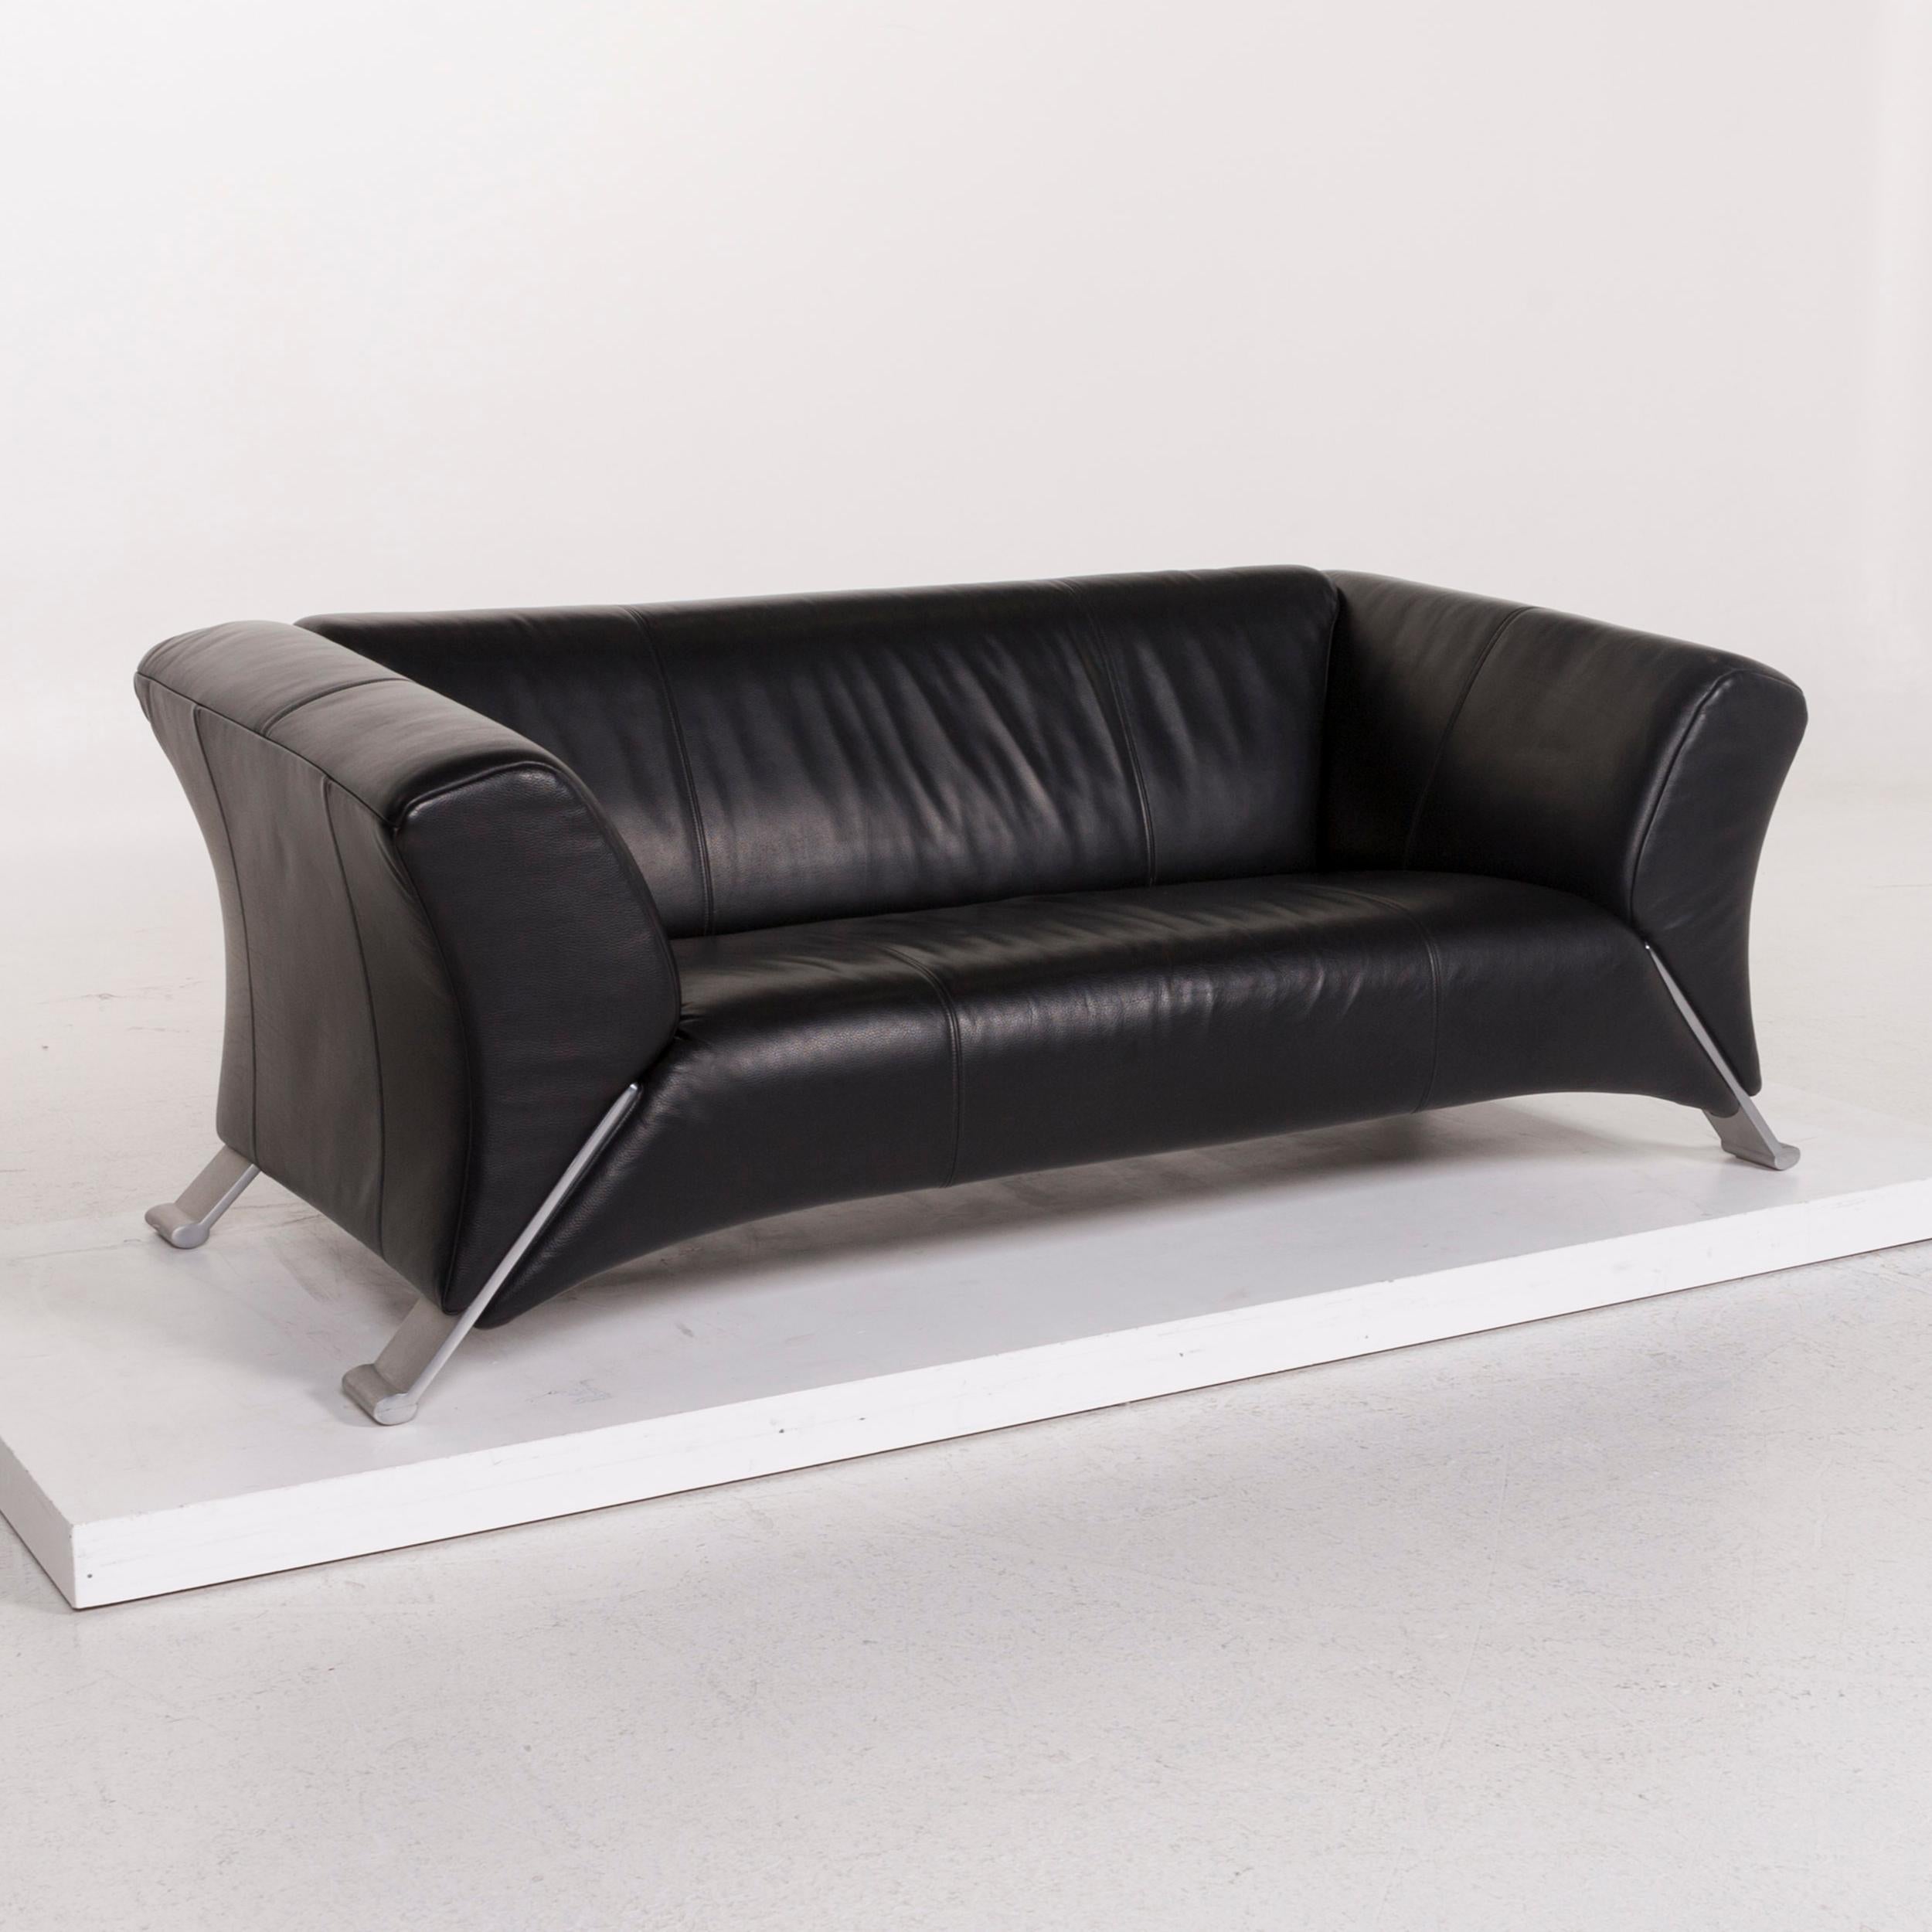 German Rolf Benz 322 Leather Sofa Black Two-Seat For Sale